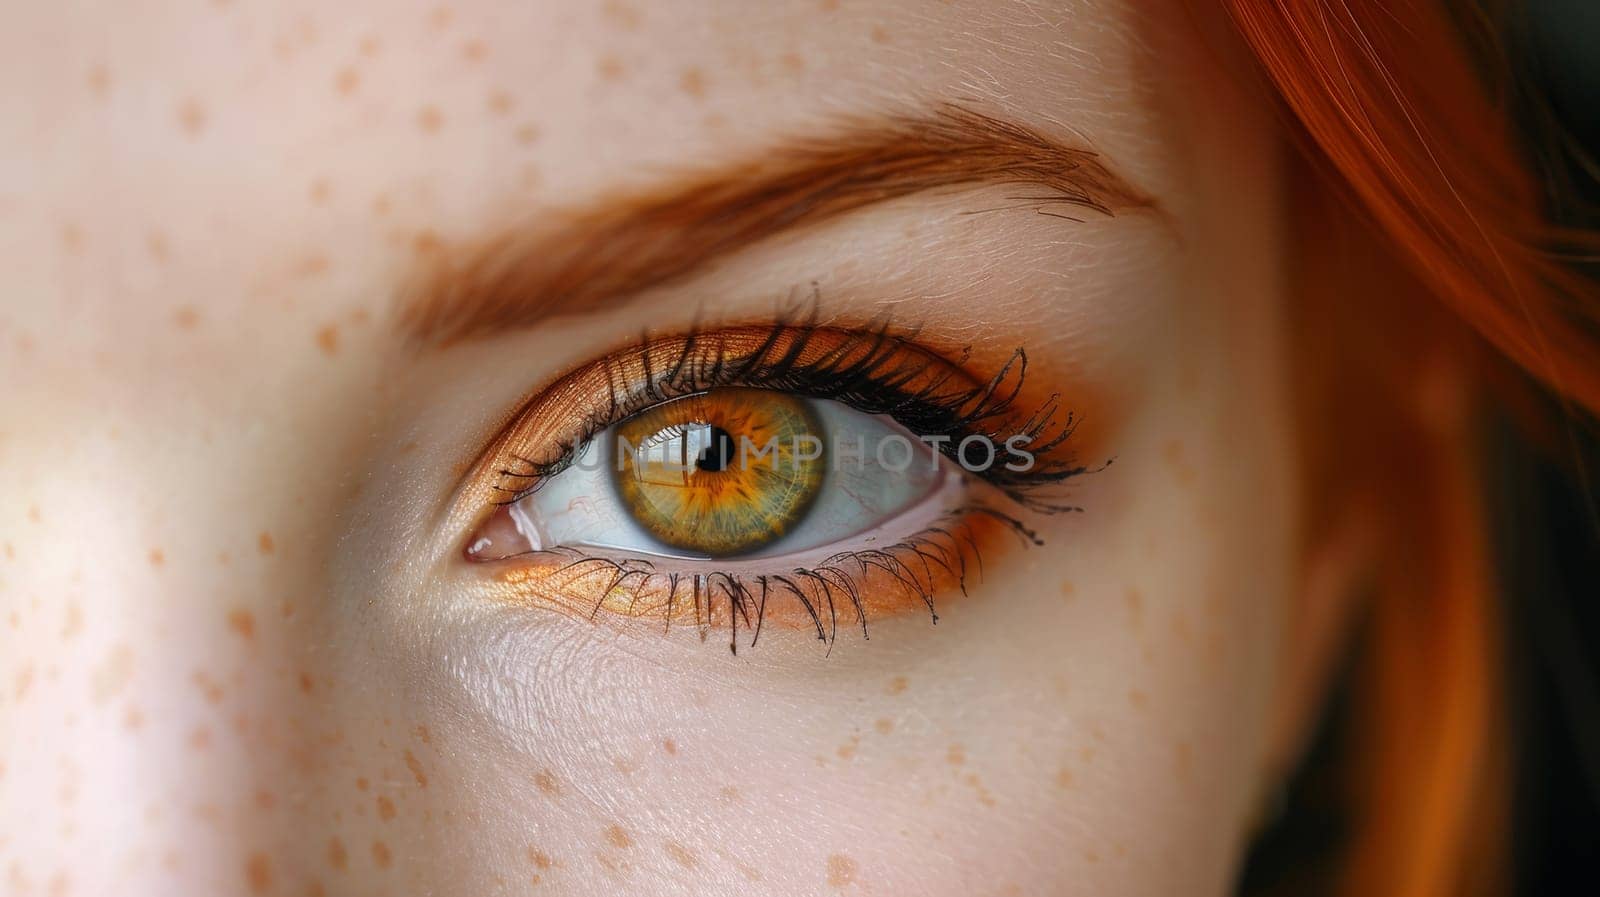 A close up of a woman's eye with red hair and freckles